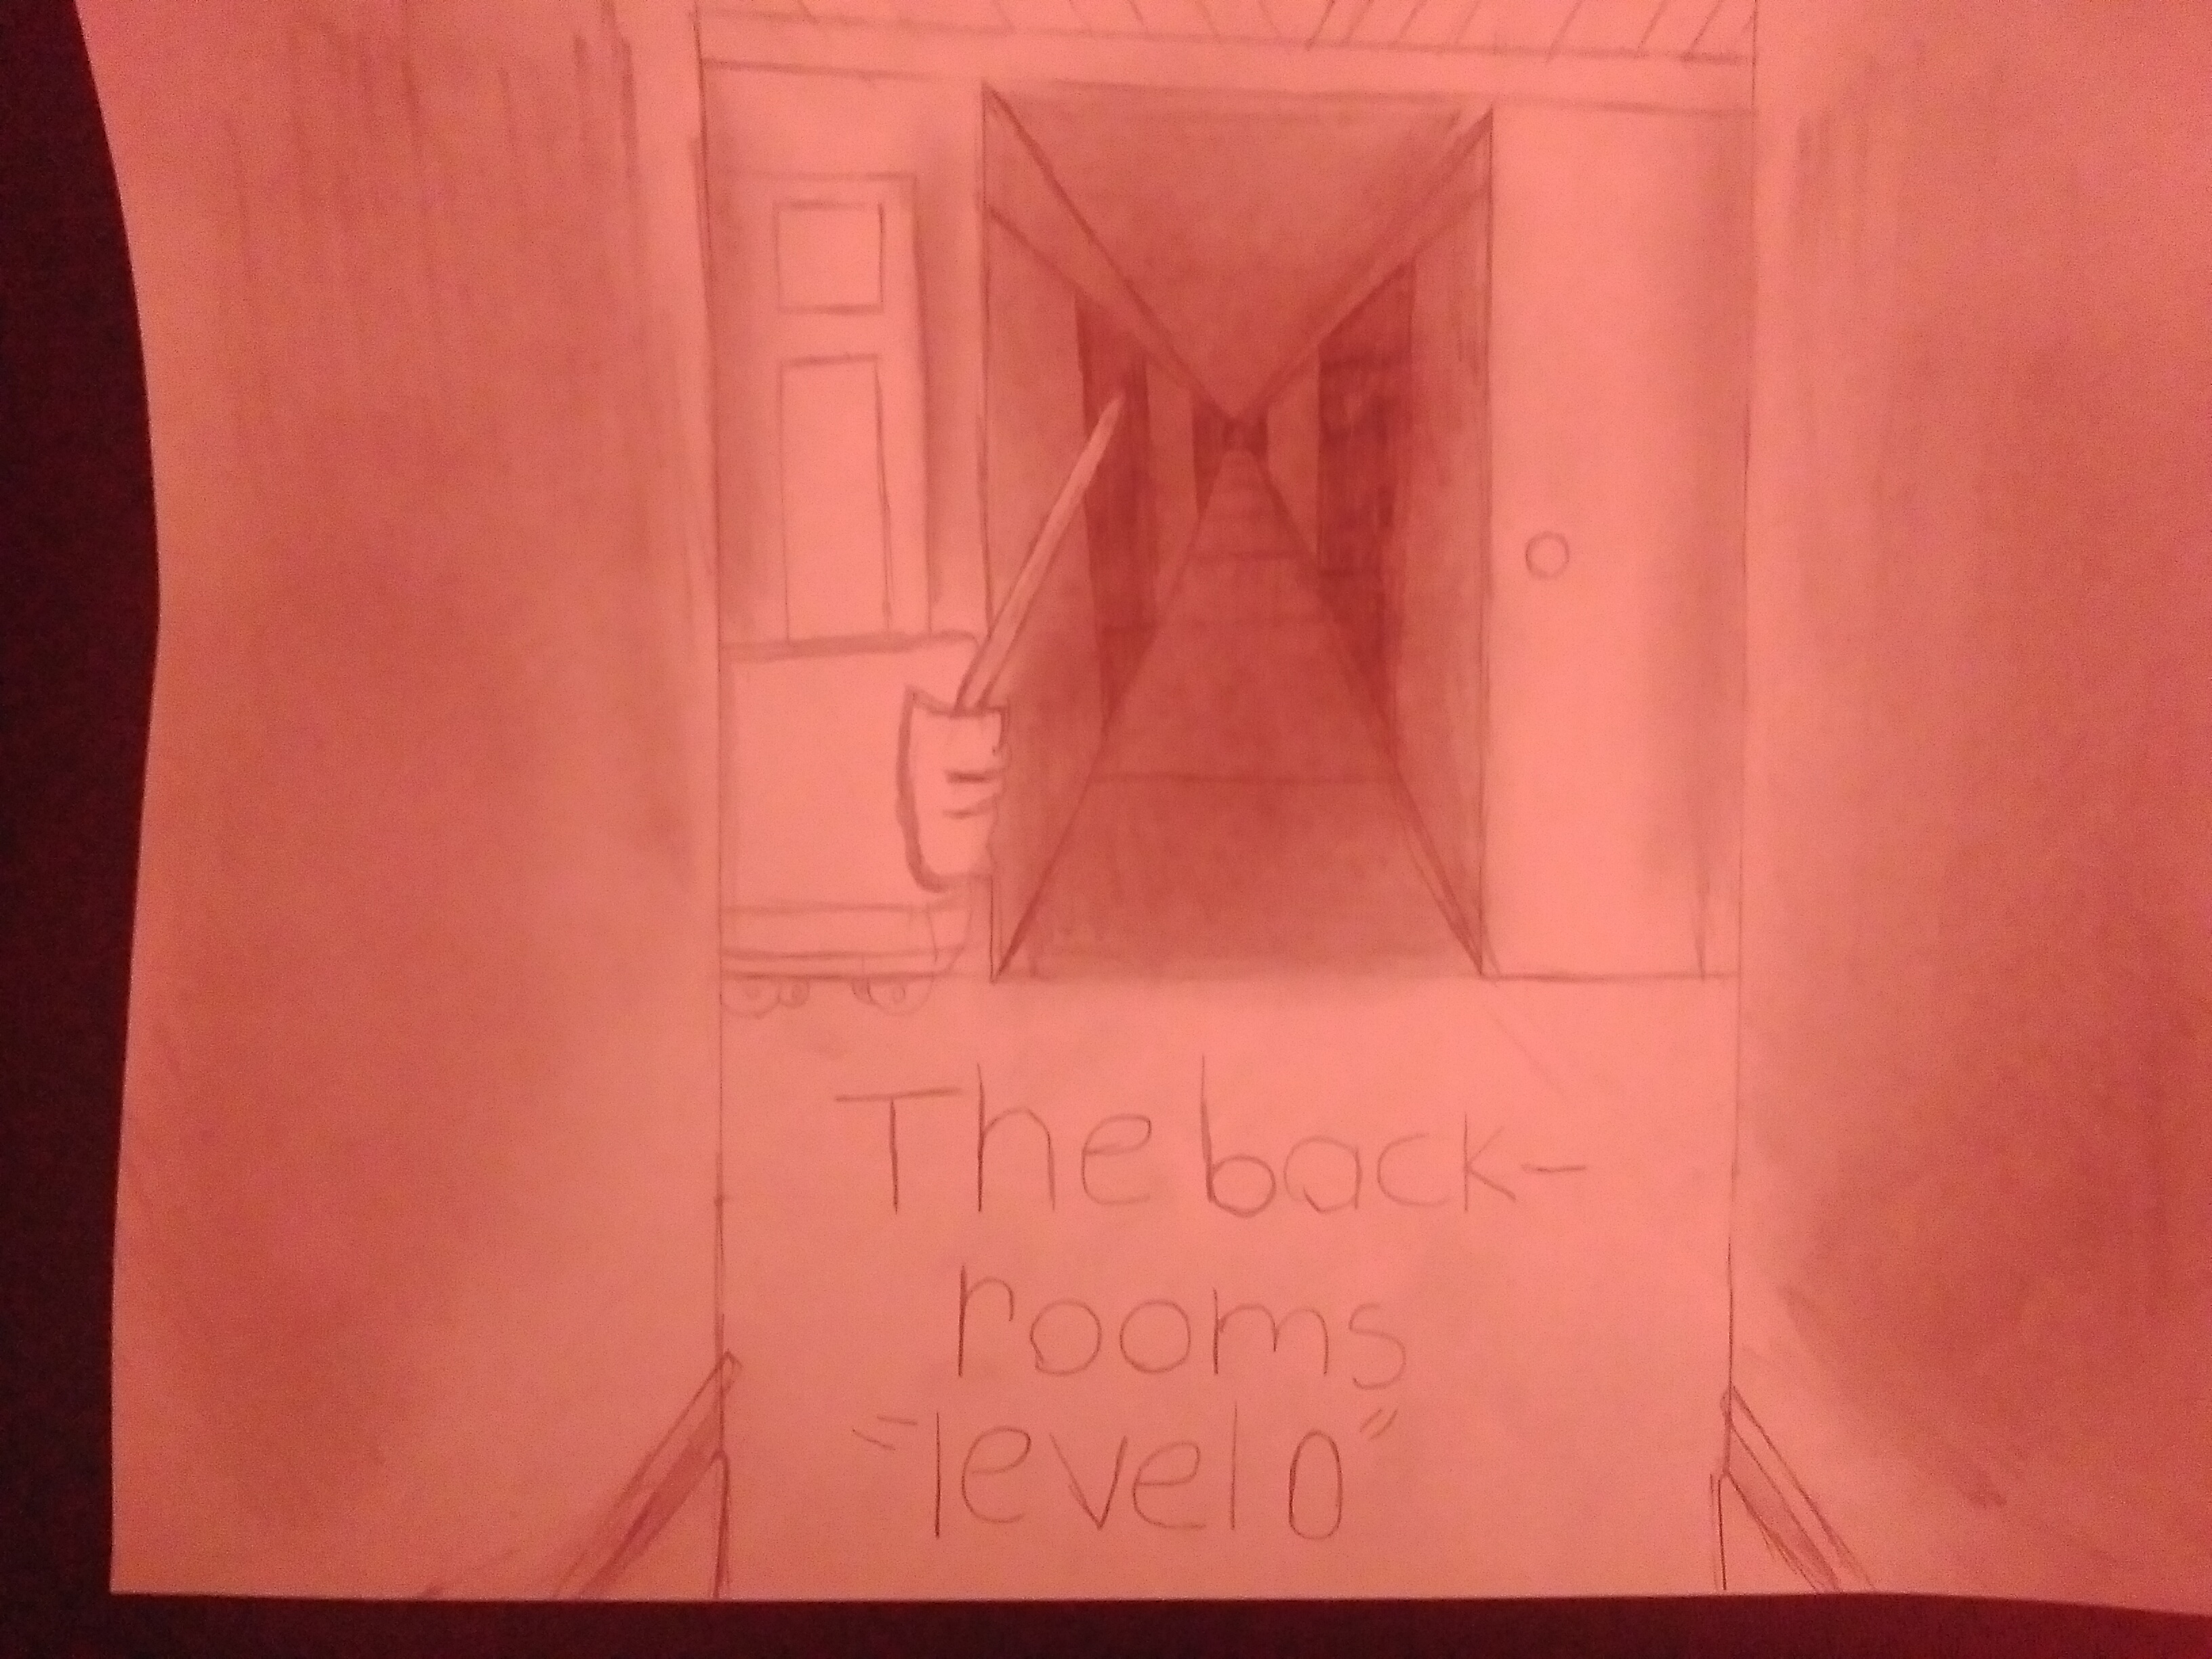 The backrooms level 0 by The-Backrooms on DeviantArt